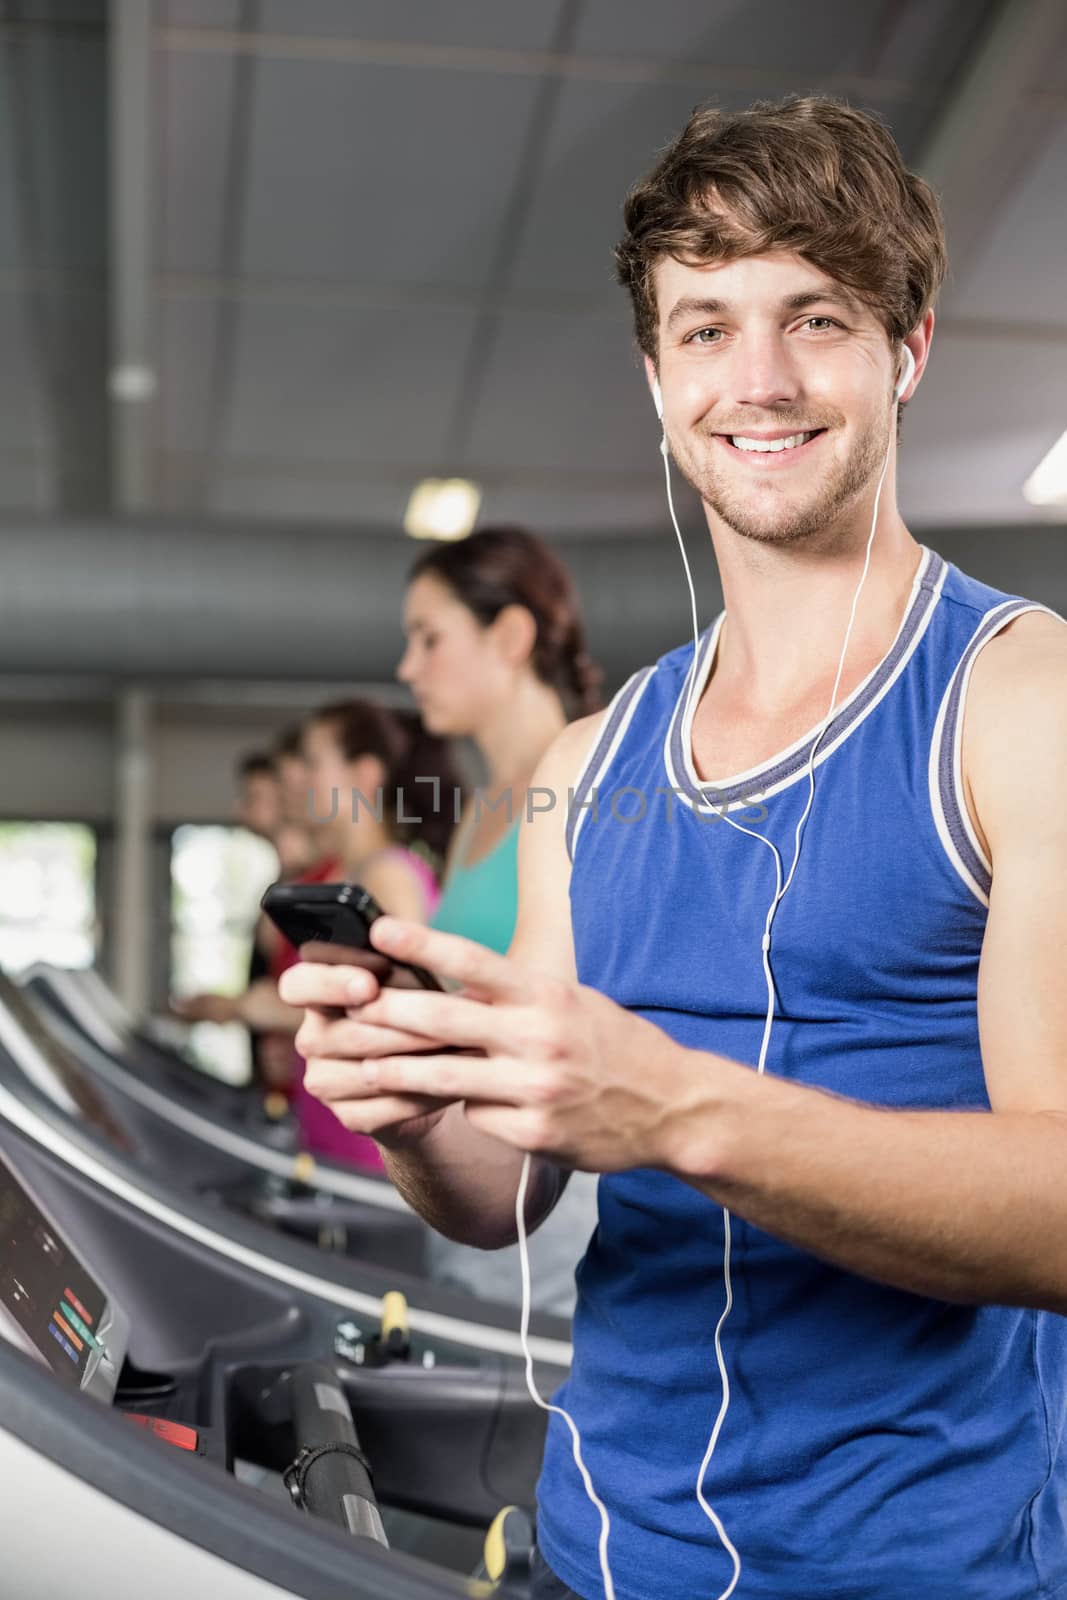 Smiling muscular man on treadmill listening to music at gym 